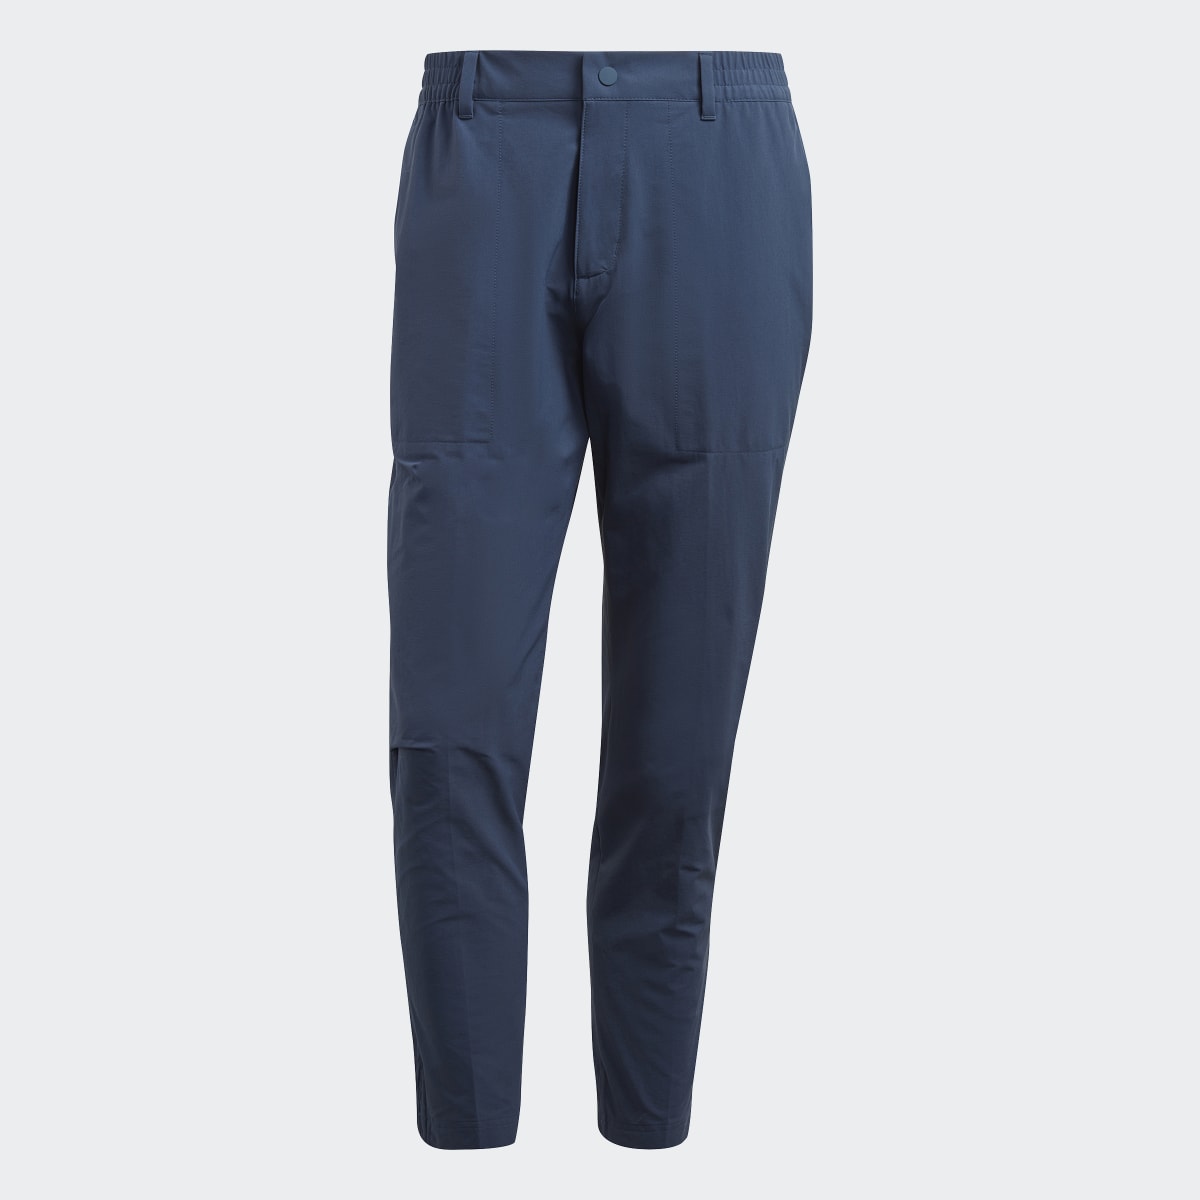 Adidas Go-To Commuter Golf Pants. 5